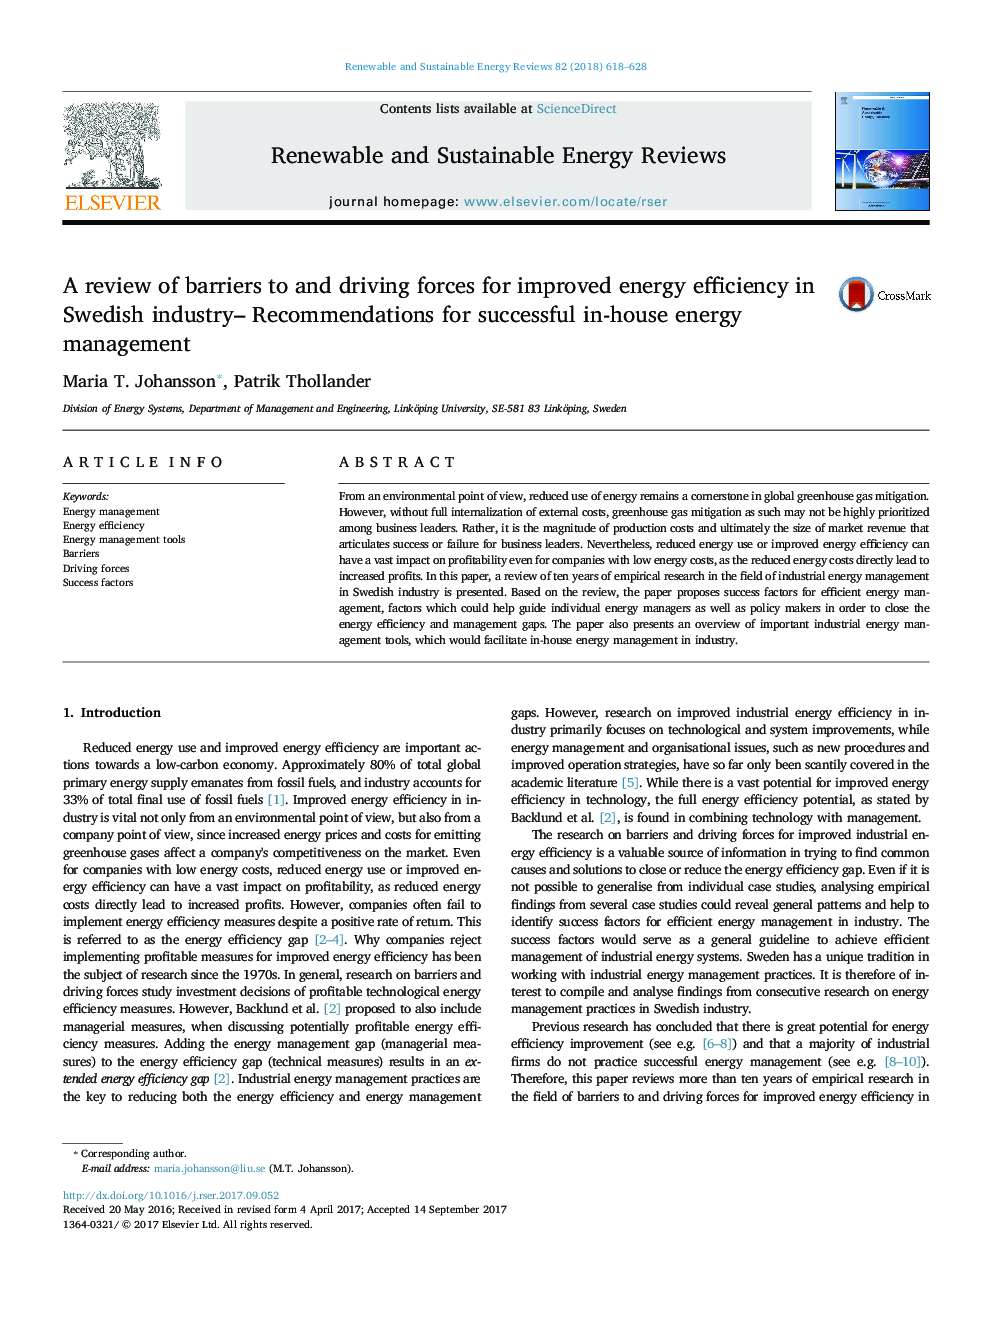 A review of barriers to and driving forces for improved energy efficiency in Swedish industry- Recommendations for successful in-house energy management